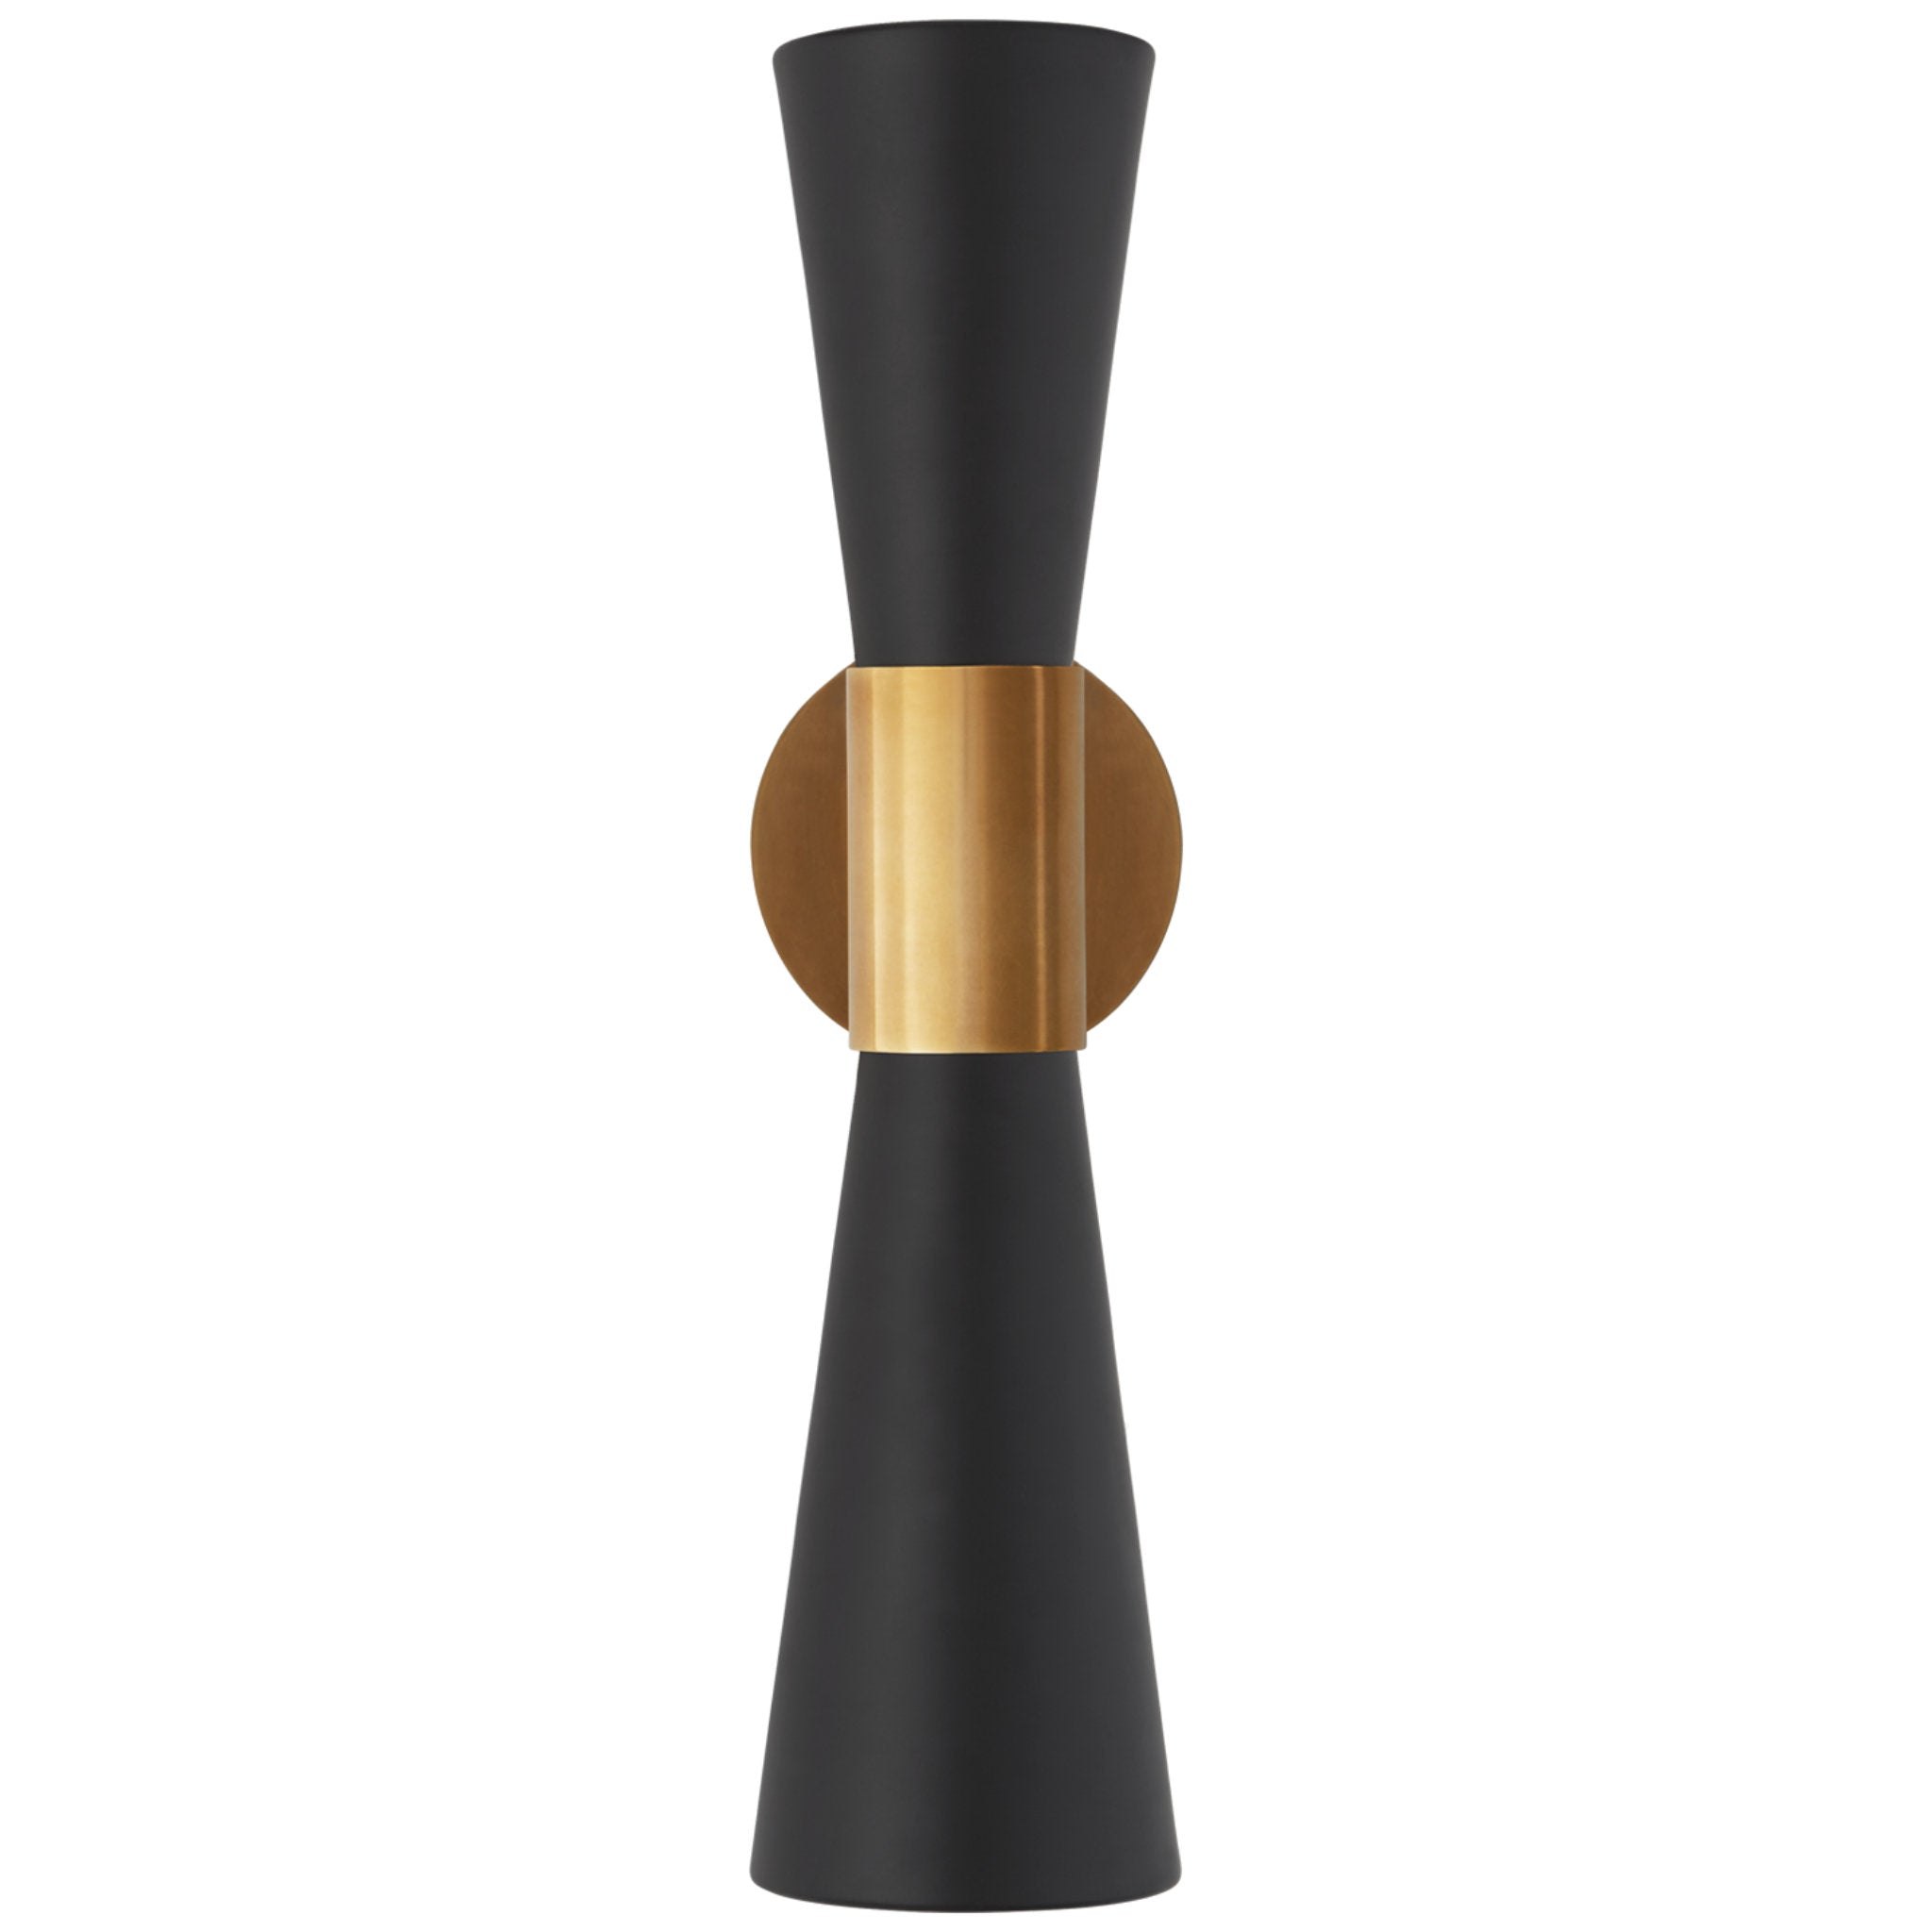 AERIN Clarkson Medium Narrow Sconce in Hand-Rubbed Antique Brass and Black